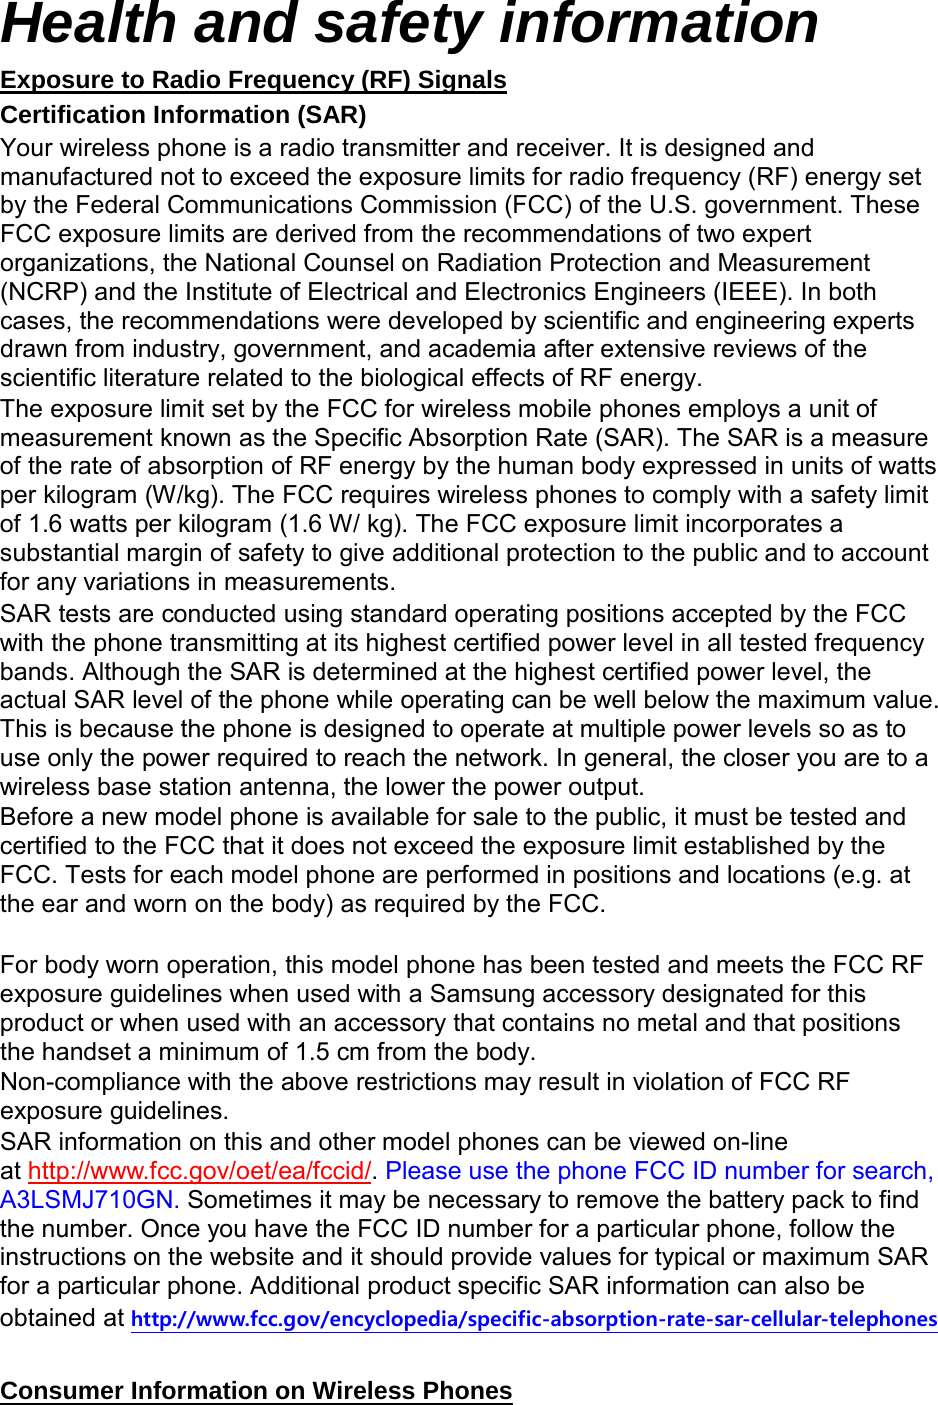 Health and safety information Certification Information (SAR) Exposure to Radio Frequency (RF) Signals Your wireless phone is a radio transmitter and receiver. It is designed and manufactured not to exceed the exposure limits for radio frequency (RF) energy set by the Federal Communications Commission (FCC) of the U.S. government. These FCC exposure limits are derived from the recommendations of two expert organizations, the National Counsel on Radiation Protection and Measurement (NCRP) and the Institute of Electrical and Electronics Engineers (IEEE). In both cases, the recommendations were developed by scientific and engineering experts drawn from industry, government, and academia after extensive reviews of the scientific literature related to the biological effects of RF energy. The exposure limit set by the FCC for wireless mobile phones employs a unit of measurement known as the Specific Absorption Rate (SAR). The SAR is a measure of the rate of absorption of RF energy by the human body expressed in units of watts per kilogram (W/kg). The FCC requires wireless phones to comply with a safety limit of 1.6 watts per kilogram (1.6 W/ kg). The FCC exposure limit incorporates a substantial margin of safety to give additional protection to the public and to account for any variations in measurements. SAR tests are conducted using standard operating positions accepted by the FCC with the phone transmitting at its highest certified power level in all tested frequency bands. Although the SAR is determined at the highest certified power level, the actual SAR level of the phone while operating can be well below the maximum value. This is because the phone is designed to operate at multiple power levels so as to use only the power required to reach the network. In general, the closer you are to a wireless base station antenna, the lower the power output. Before a new model phone is available for sale to the public, it must be tested and certified to the FCC that it does not exceed the exposure limit established by the FCC. Tests for each model phone are performed in positions and locations (e.g. at the ear and worn on the body) as required by the FCC.      For body worn operation, this model phone has been tested and meets the FCC RF exposure guidelines when used with a Samsung accessory designated for this product or when used with an accessory that contains no metal and that positions the handset a minimum of 1.5 cm from the body.   Non-compliance with the above restrictions may result in violation of FCC RF exposure guidelines. SAR information on this and other model phones can be viewed on-line at http://www.fcc.gov/oet/ea/fccid/. Please use the phone FCC ID number for search, A3LSMJ710GN. Sometimes it may be necessary to remove the battery pack to find the number. Once you have the FCC ID number for a particular phone, follow the instructions on the website and it should provide values for typical or maximum SAR for a particular phone. Additional product specific SAR information can also be obtained at http://www.fcc.gov/encyclopedia/specific-absorption-rate-sar-cellular-telephones  Consumer Information on Wireless Phones 